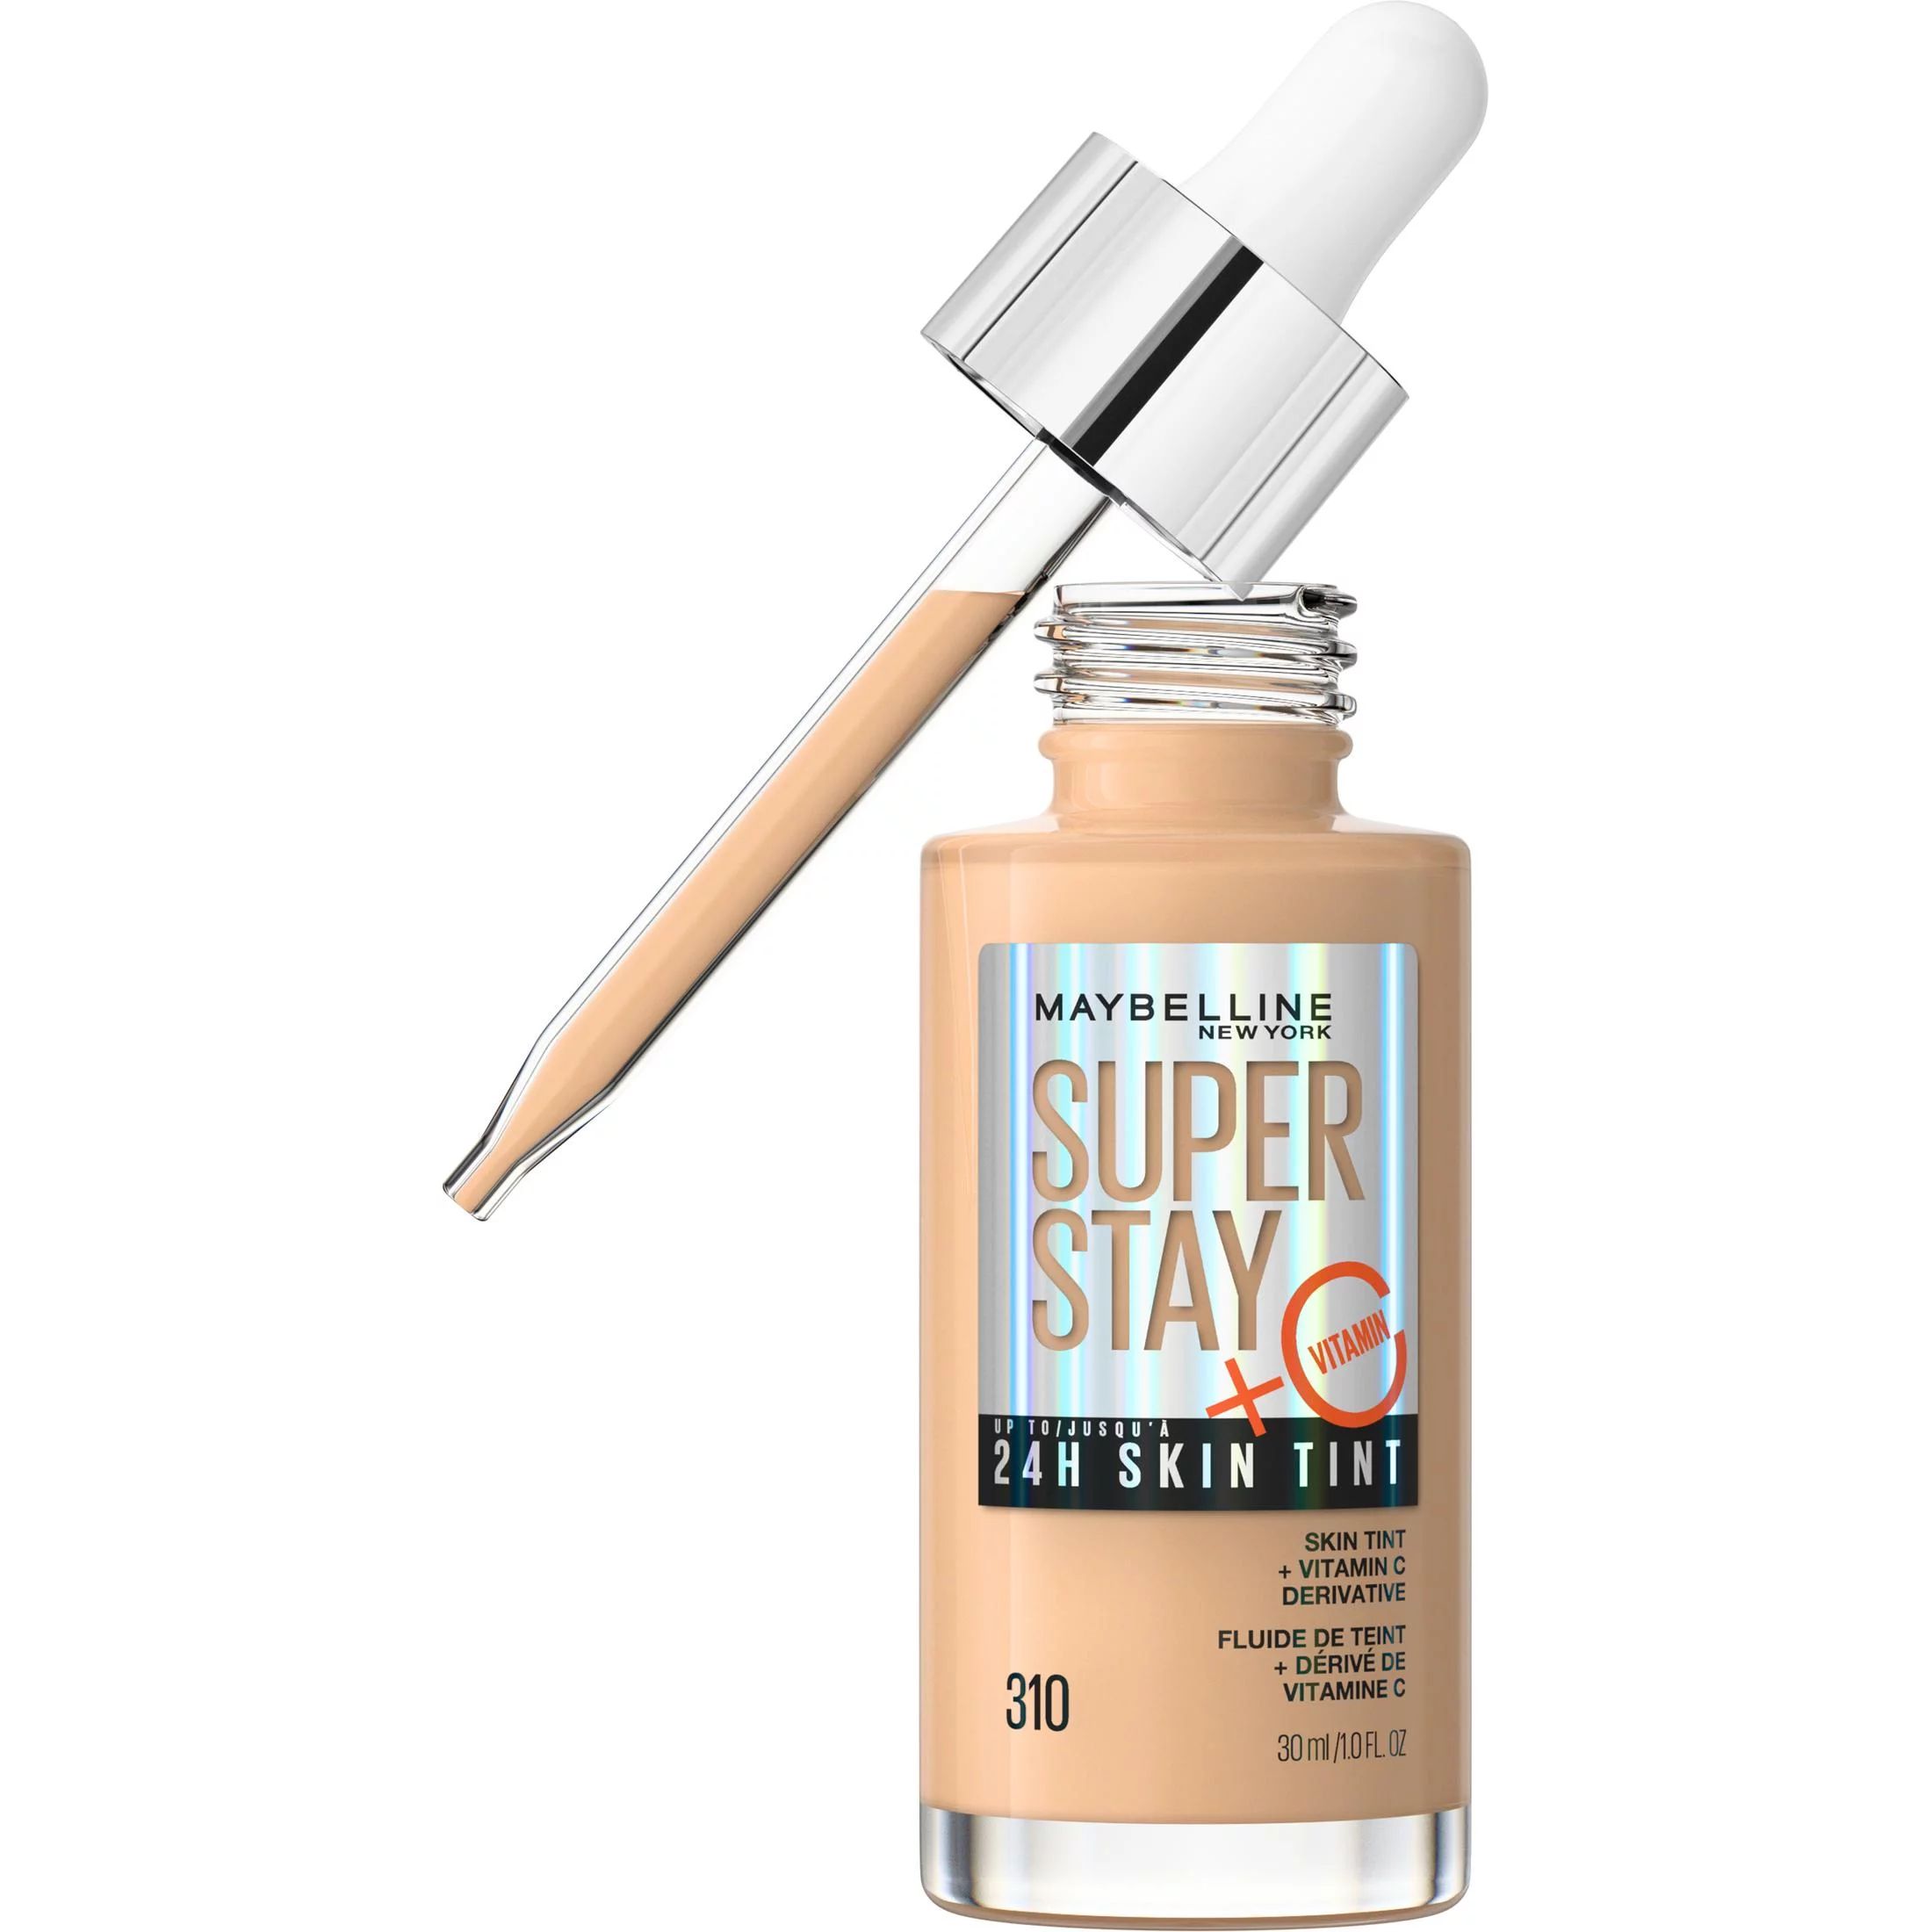 Maybelline Super Stay Super Stay Up to 24HR Skin Tint with Vitamin C, 310, 1 fl oz | Walmart (US)